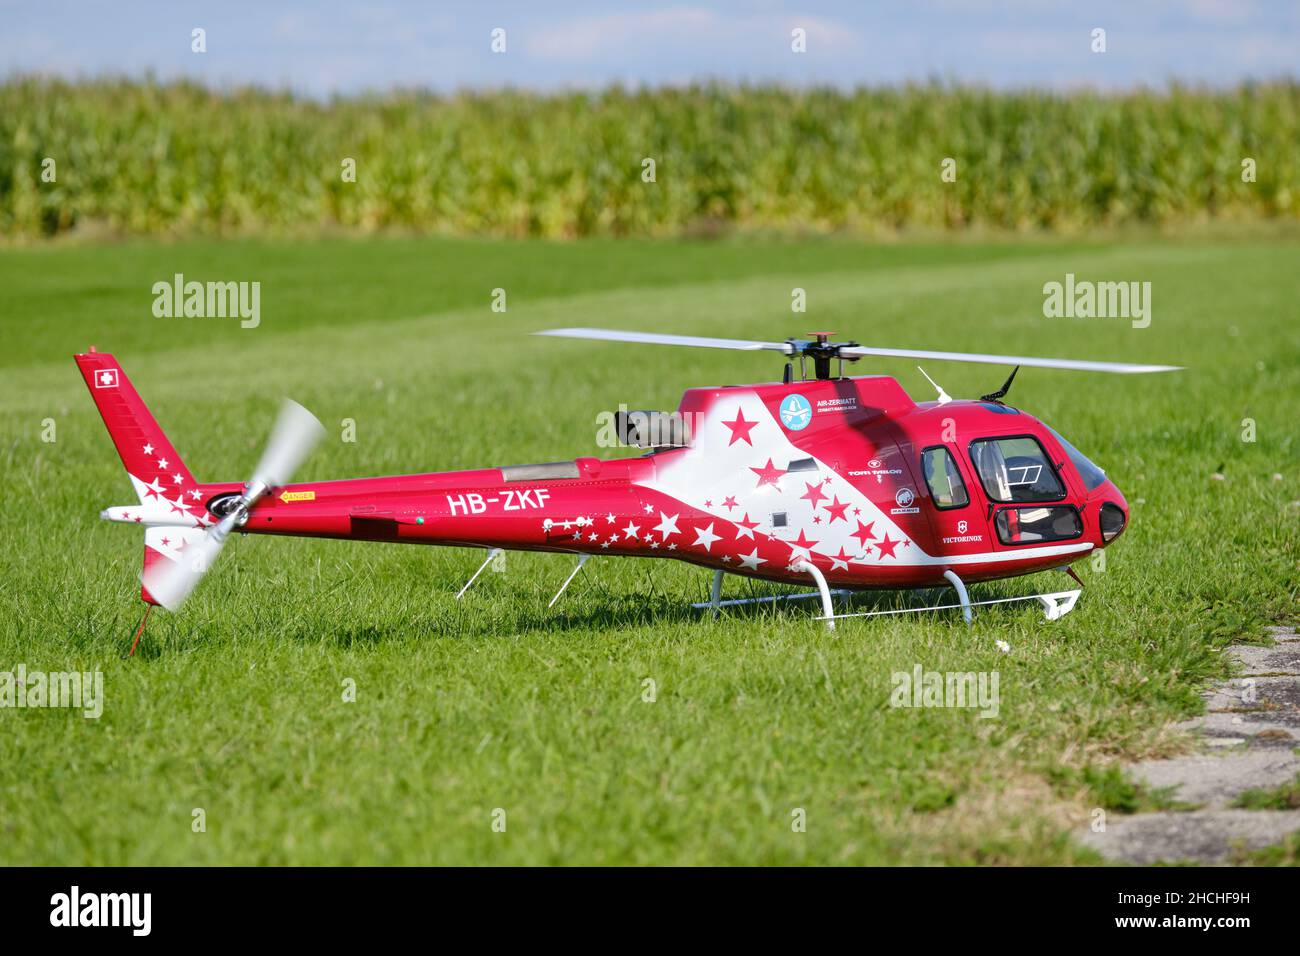 Neunhof, Germany - September 02, 2021: A radio controlled scale model of a AS350 Ecureuil helicopter with Air Zermatt design is standing on a meadow i Stock Photo